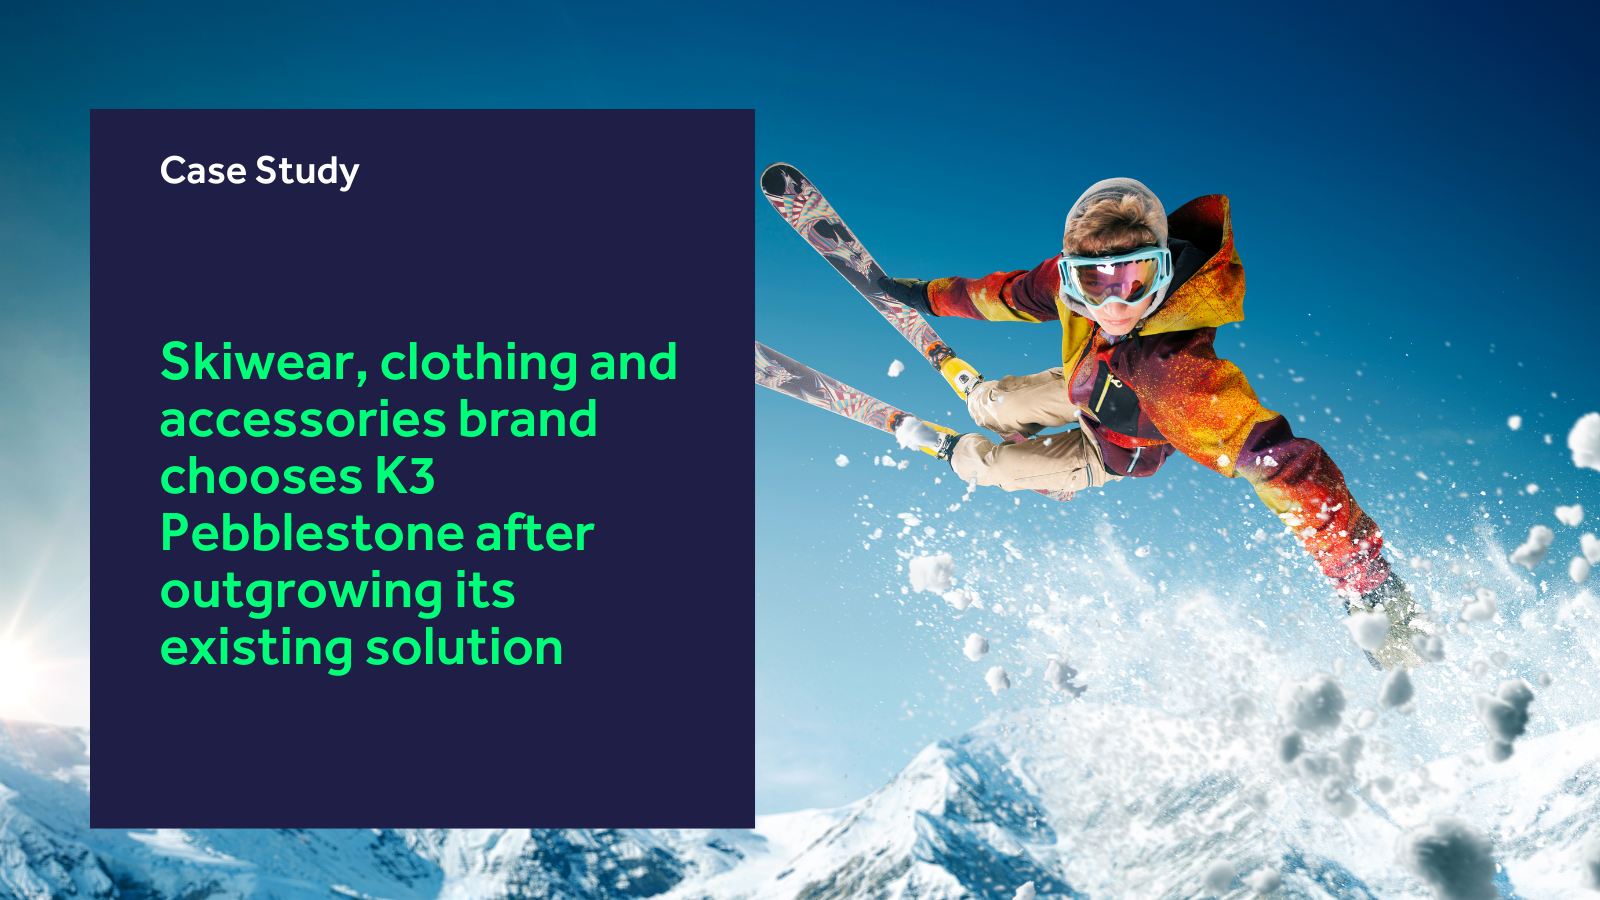 Skiwear, clothing and accessories brand chooses K3 Pebblestone after outgrowing its existing solution blog header